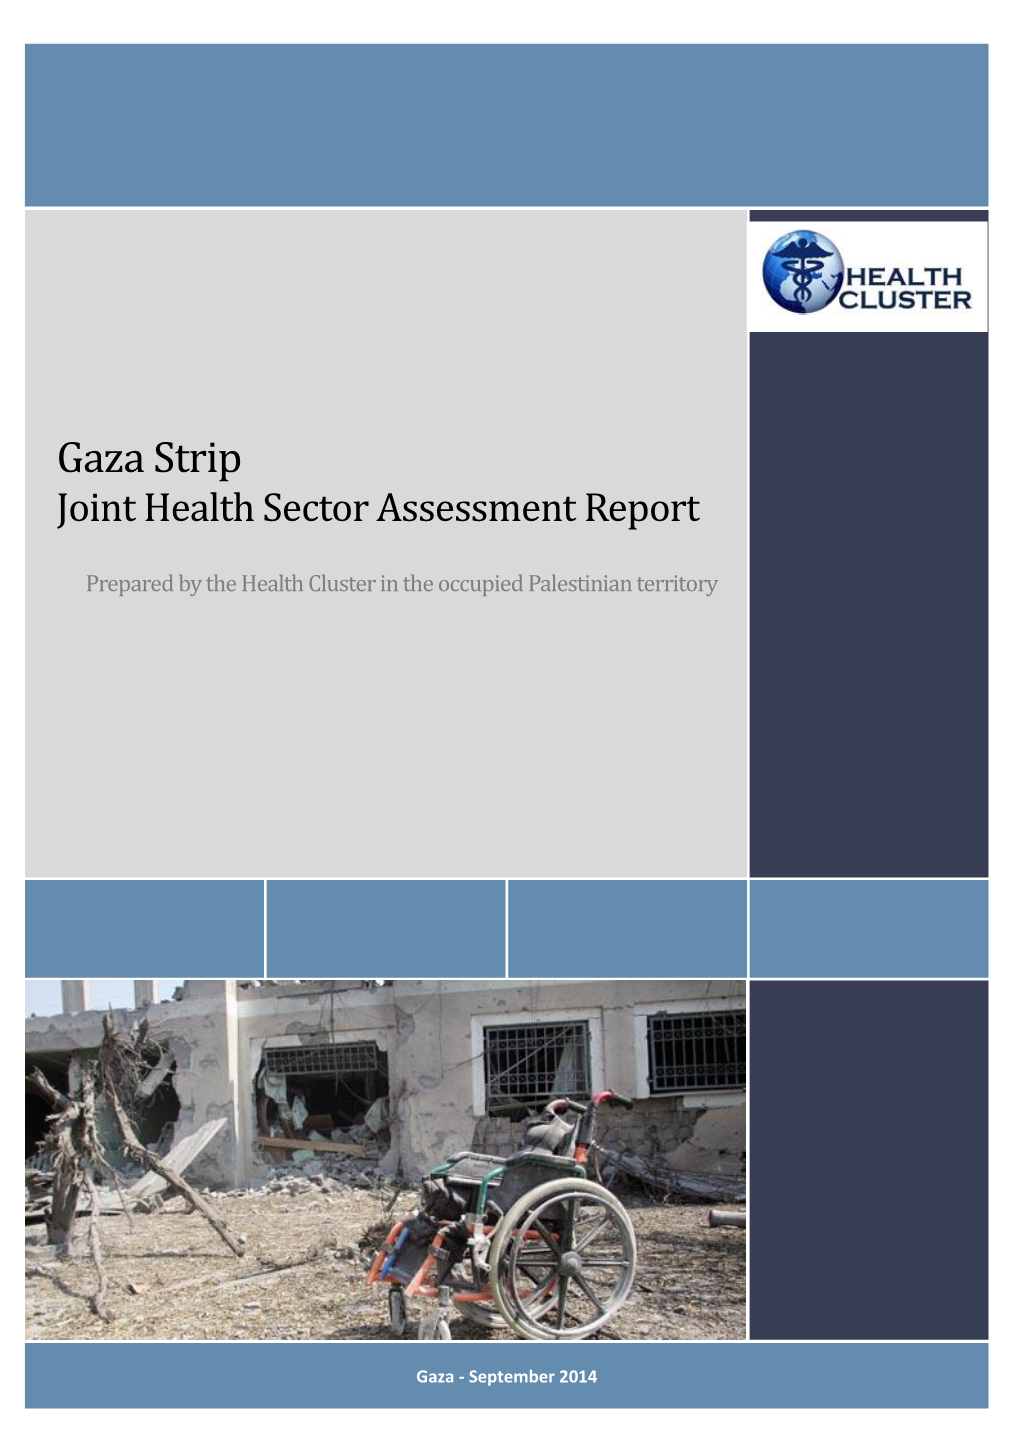 Gaza Strip Joint Health Sector Assessment Report